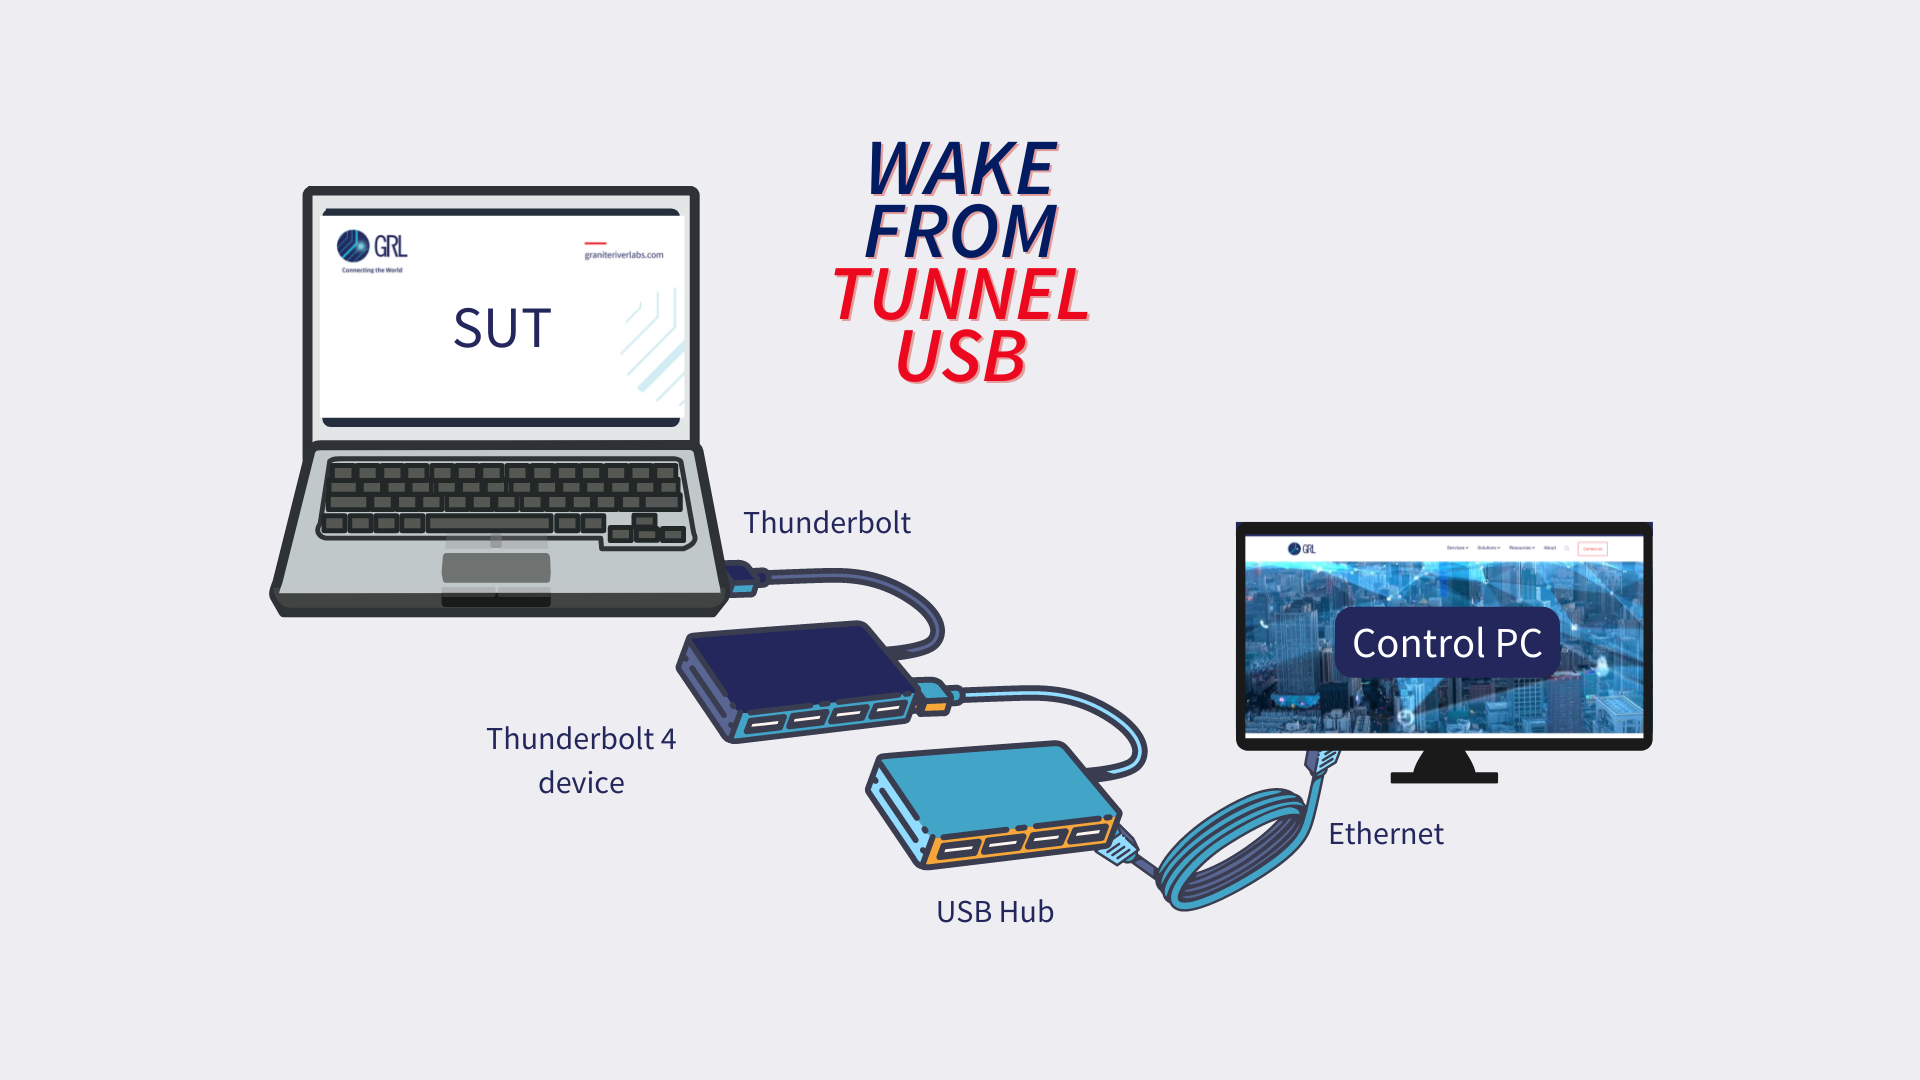 Diagram depicting Wake from Tunnel USB connection when Thunderbolt 4 device and USB hub are used for connection